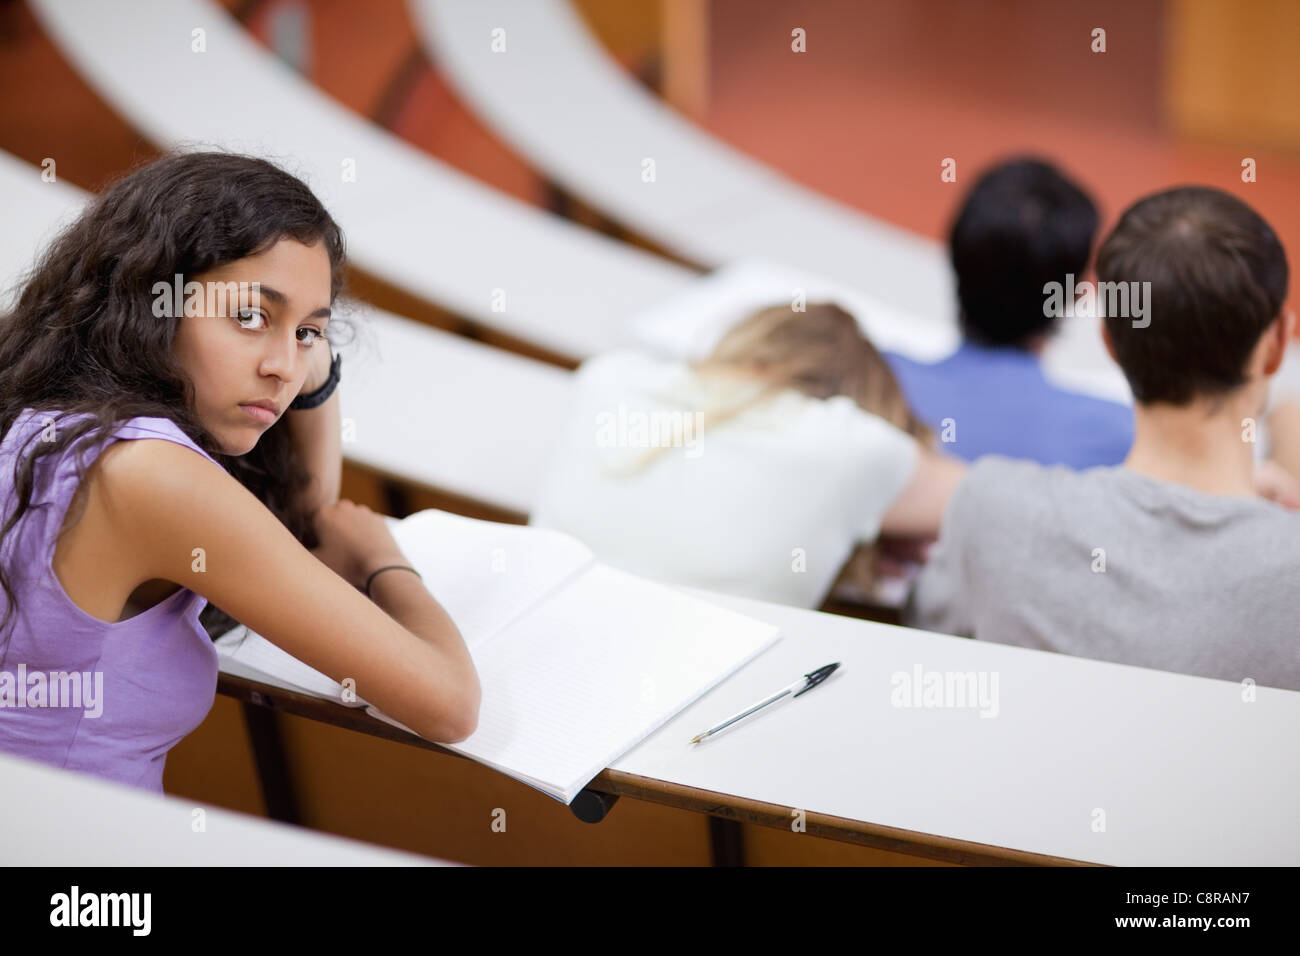 Bored student during a lecture Stock Photo